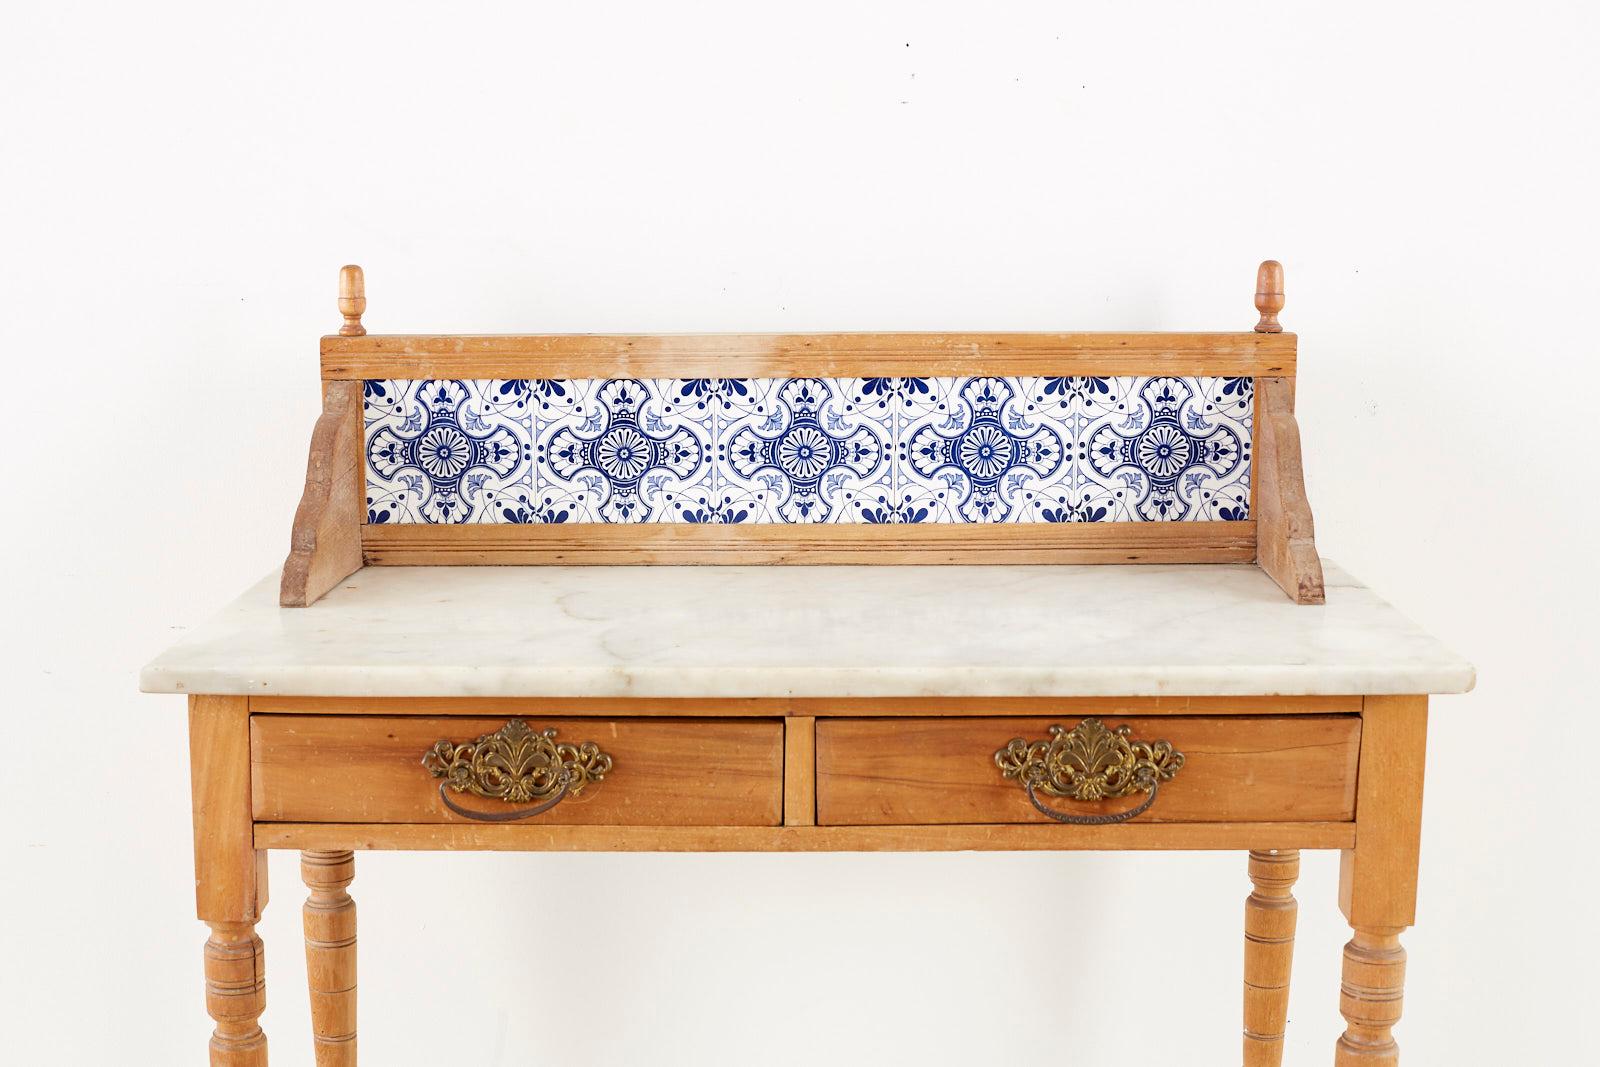 European Country Pine Marble-Top Table with Blue and White Tiles